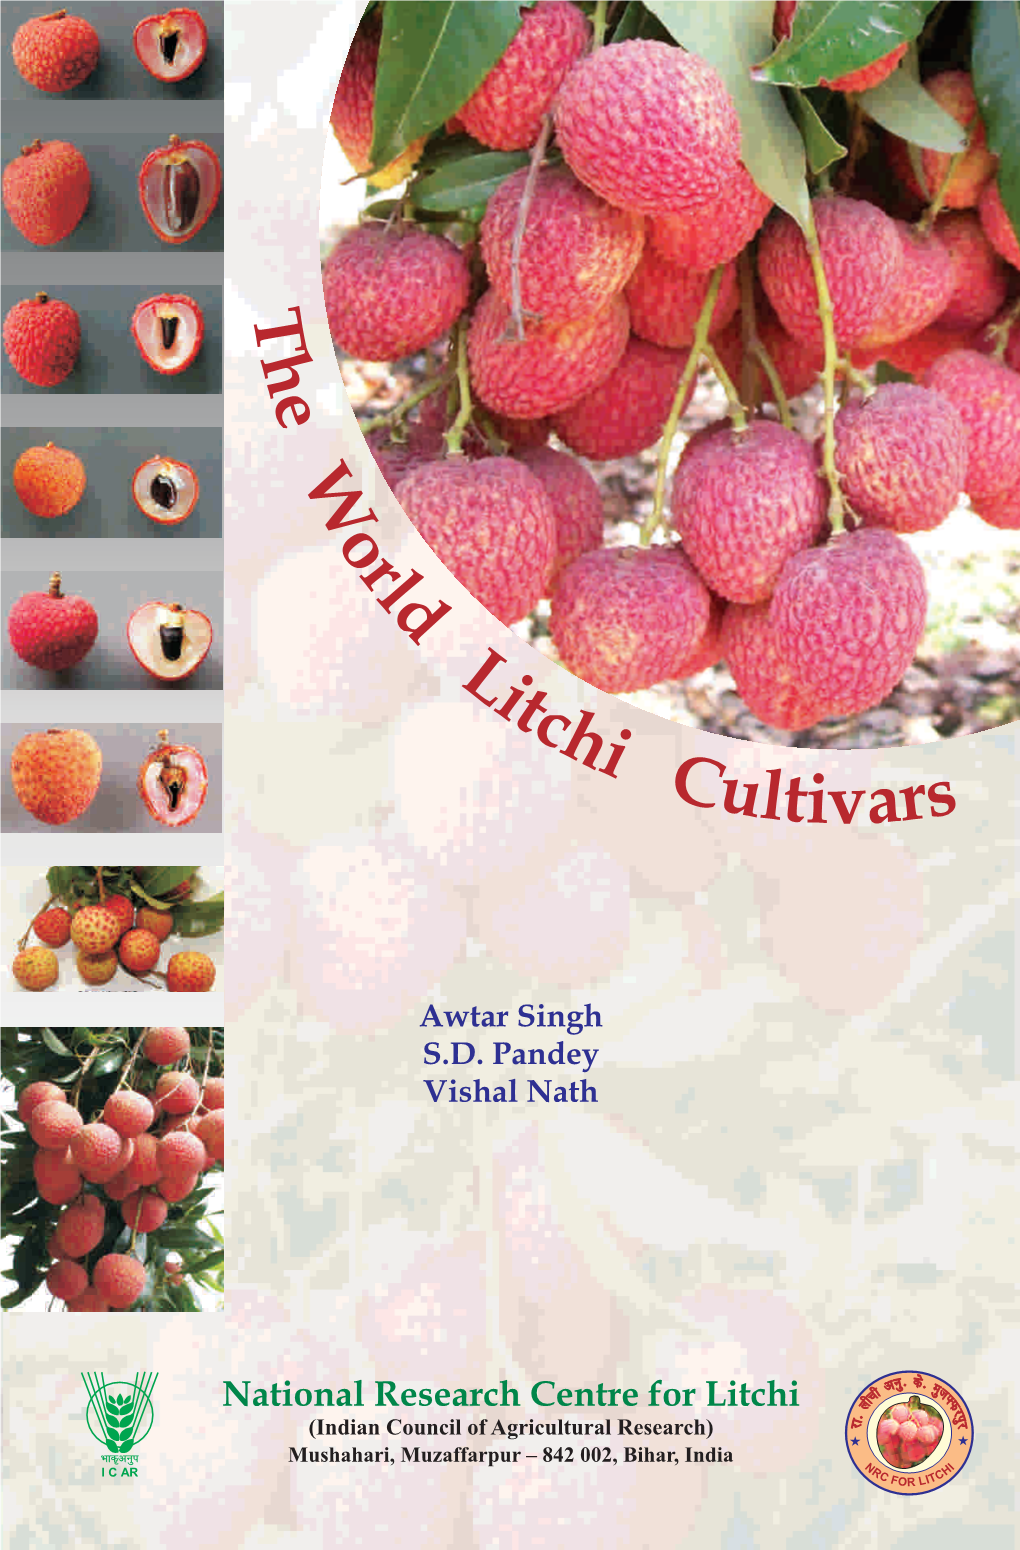 National Research Centre for Litchi Y J I - K Qj (Indian Council of Agricultural Research) J